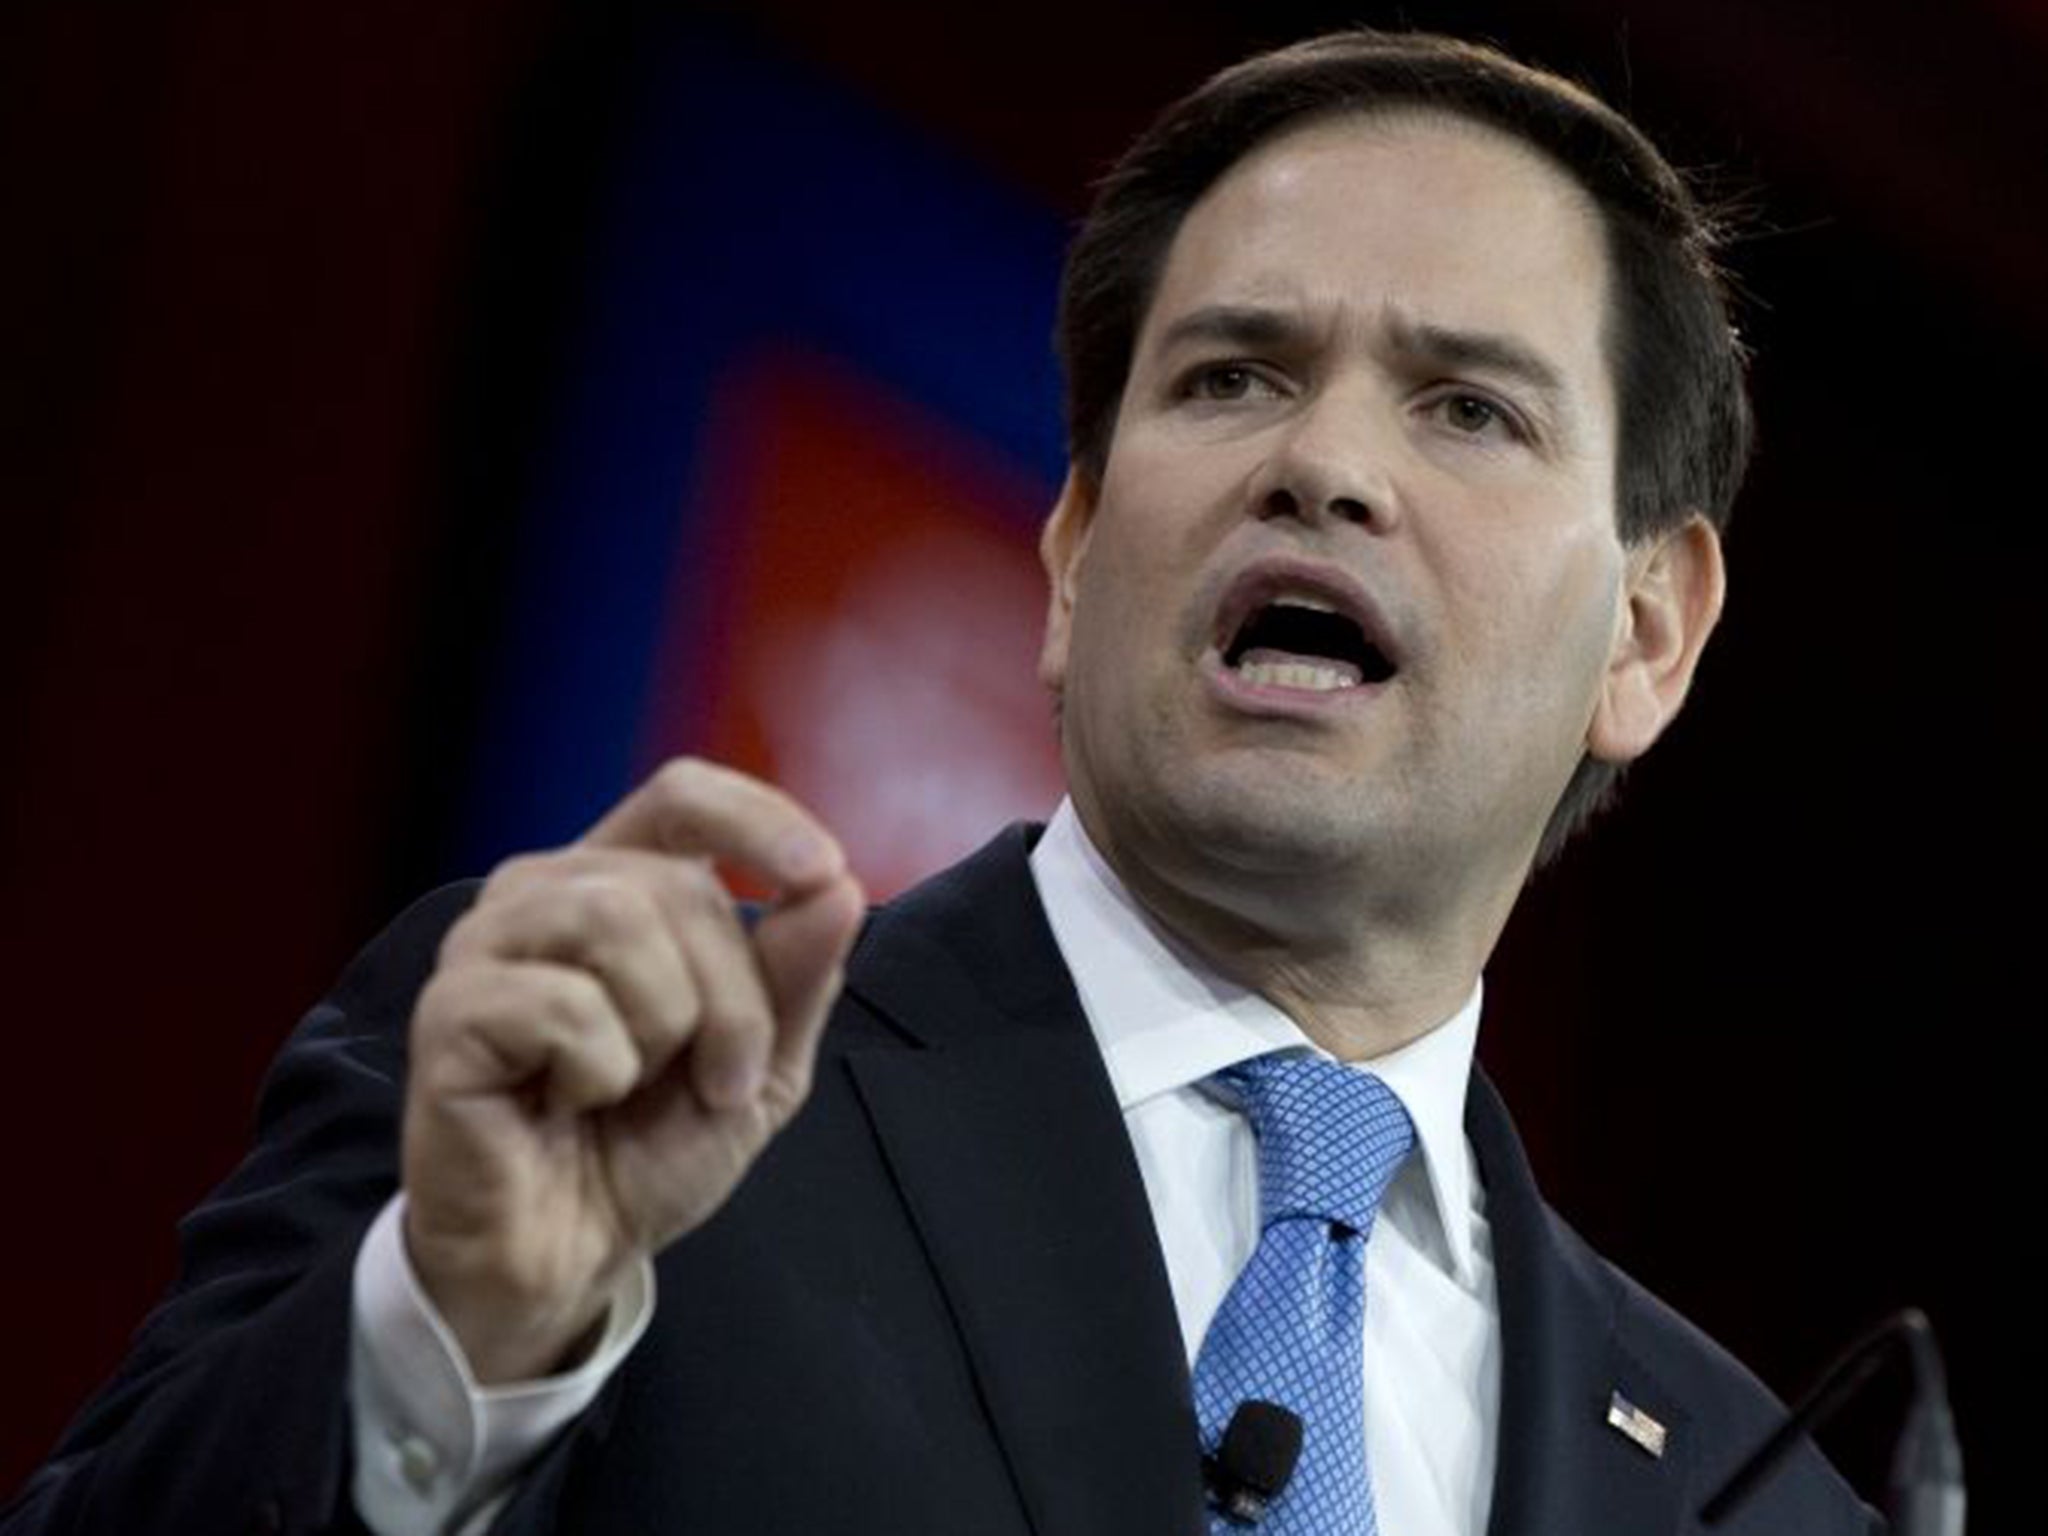 Marco Rubio has attracted some attention by wading into the Cecil the lion controversy